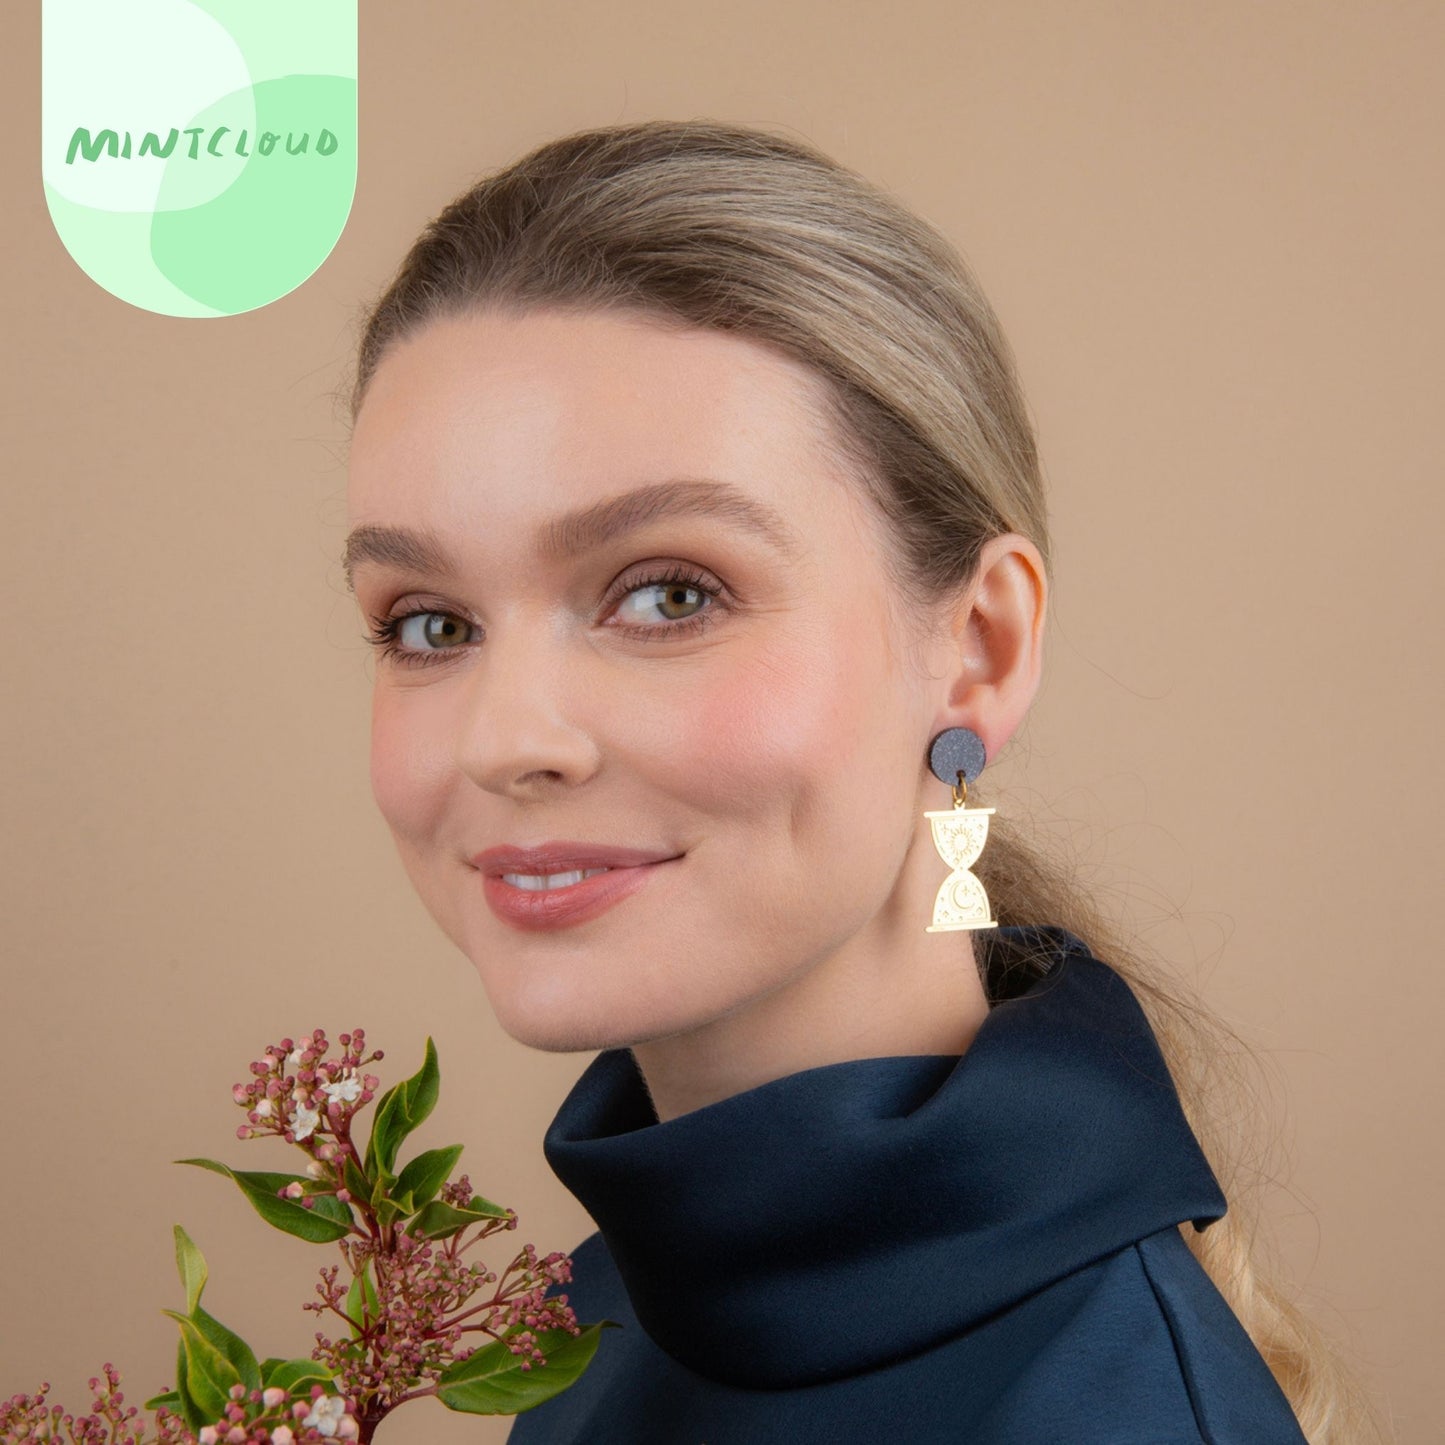 Brass Dangles - Mystic Hourglass From Mintcloud Studio, an online jewellery store based in Adelaide South Australia